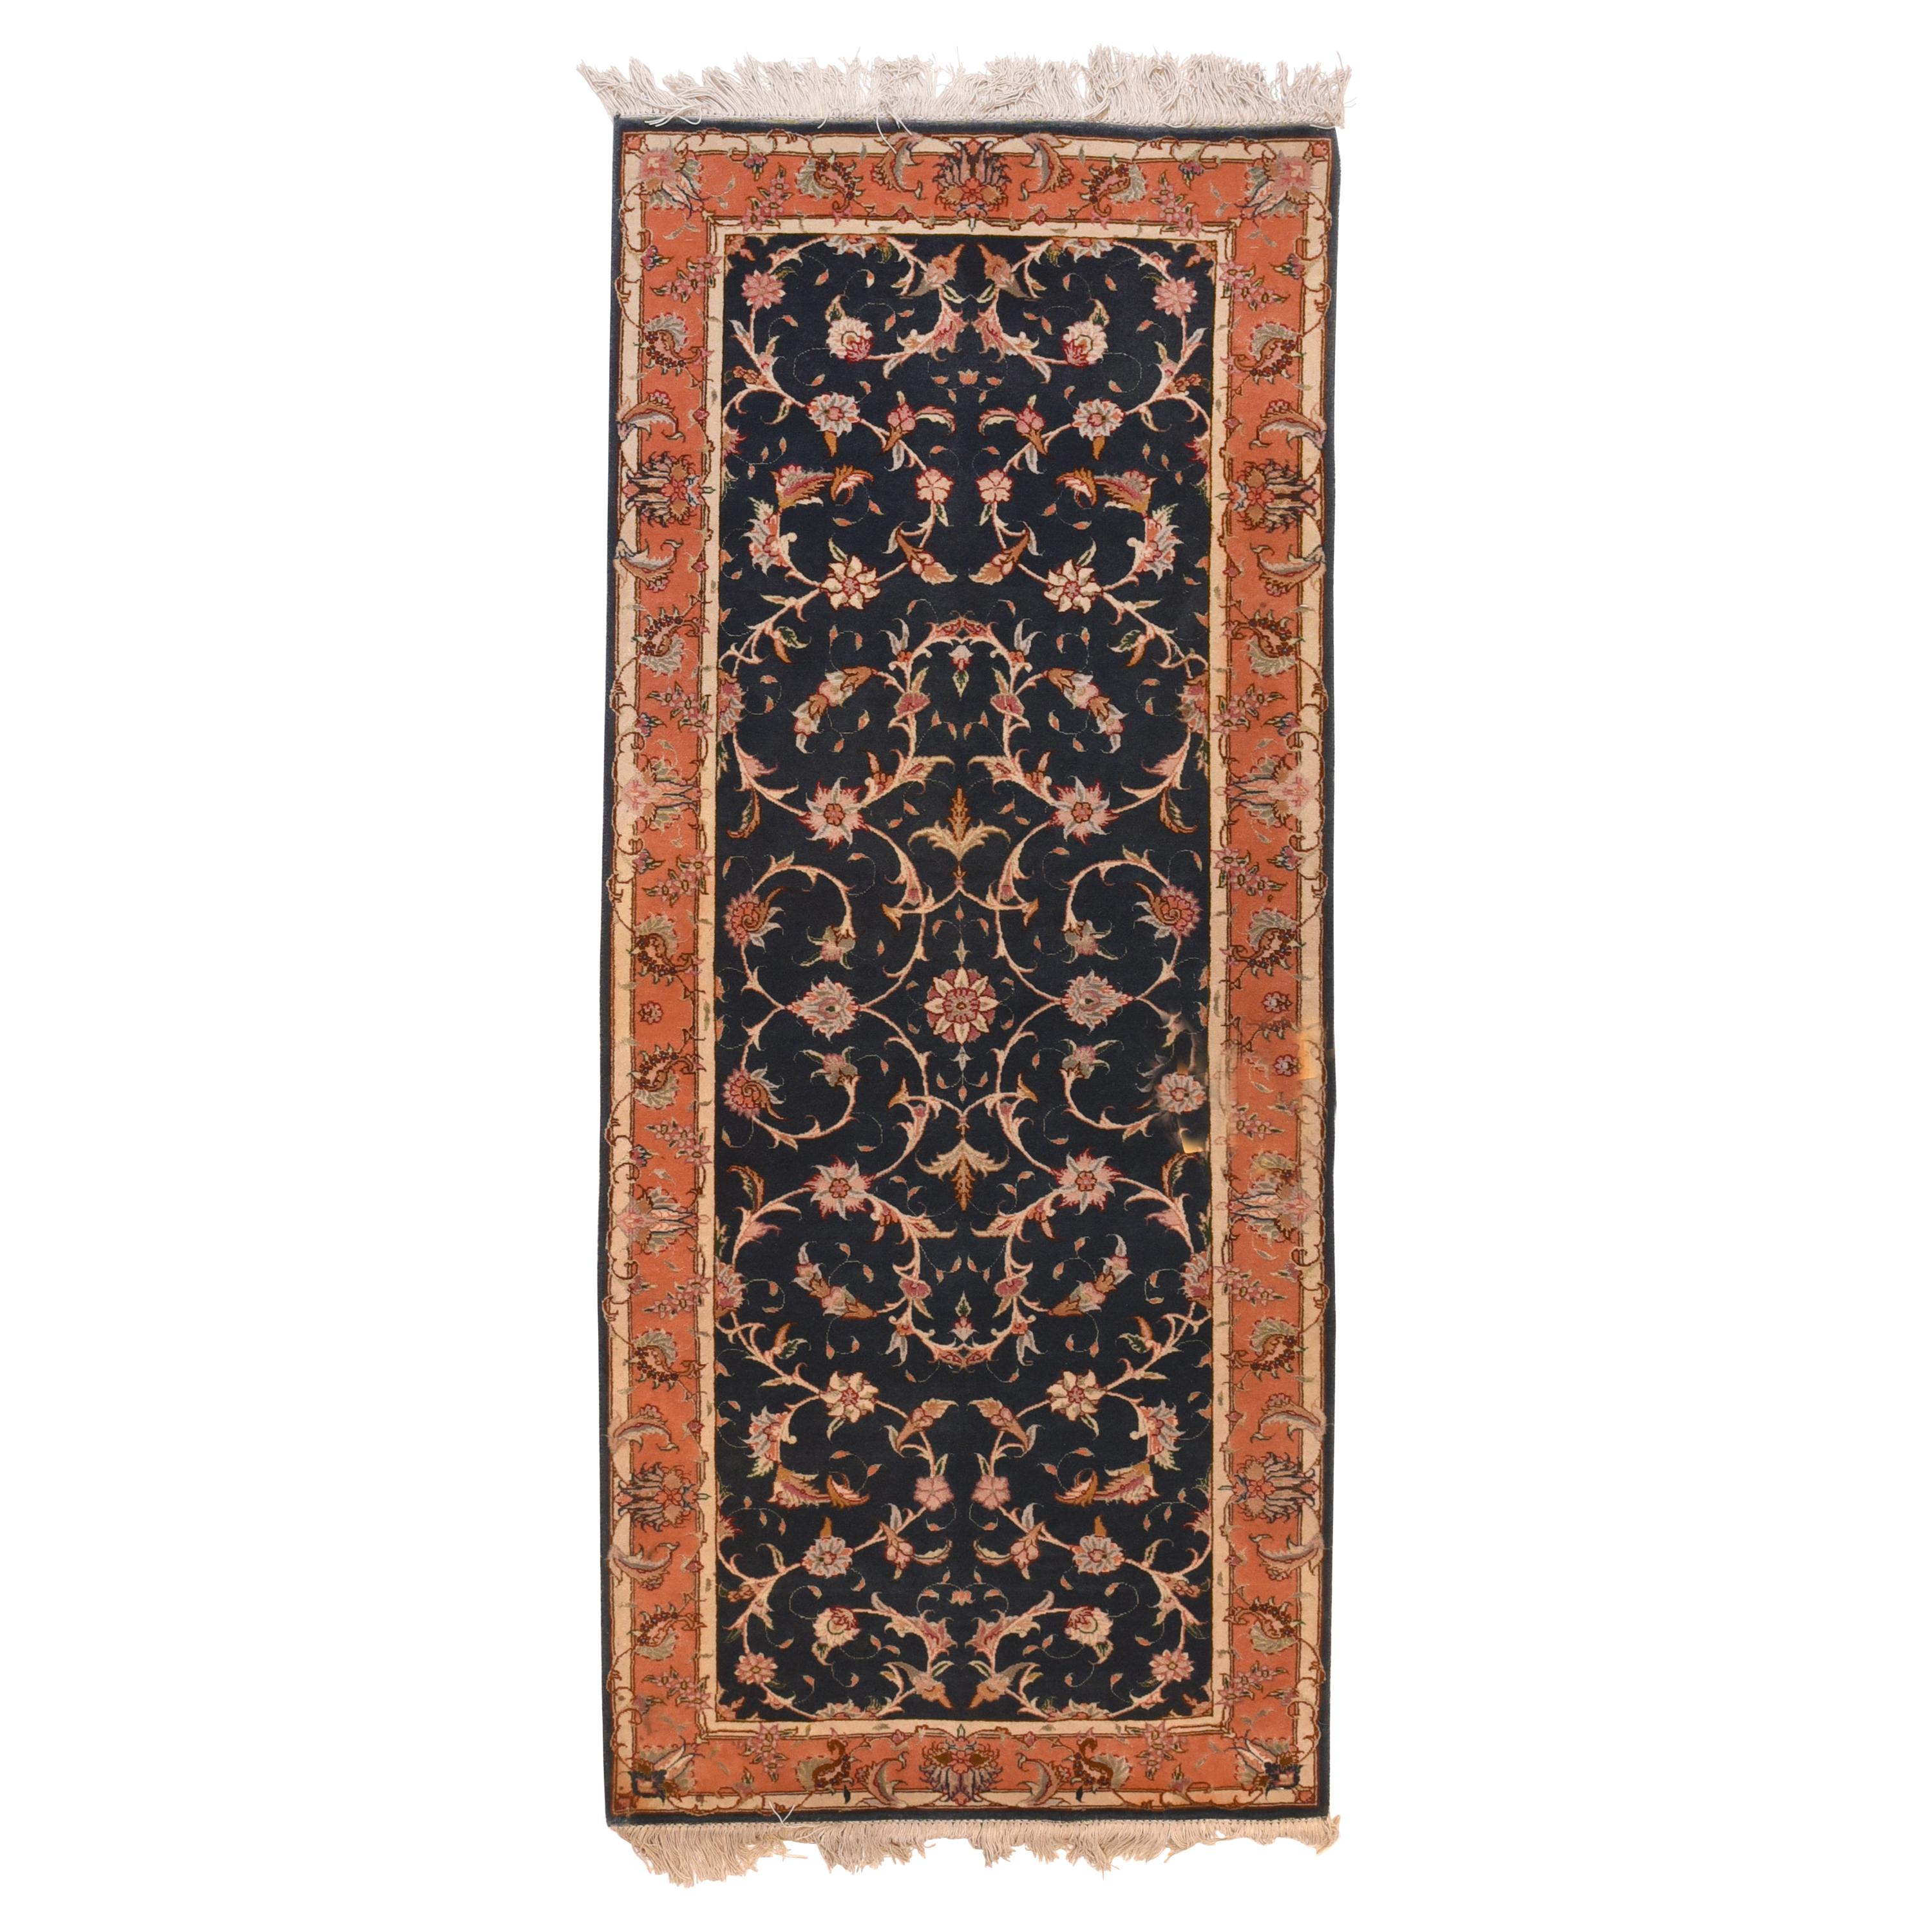 Extremely Fine Vintage Persian Tabriz Runner Rug, Hand Knotted, circa 1970s